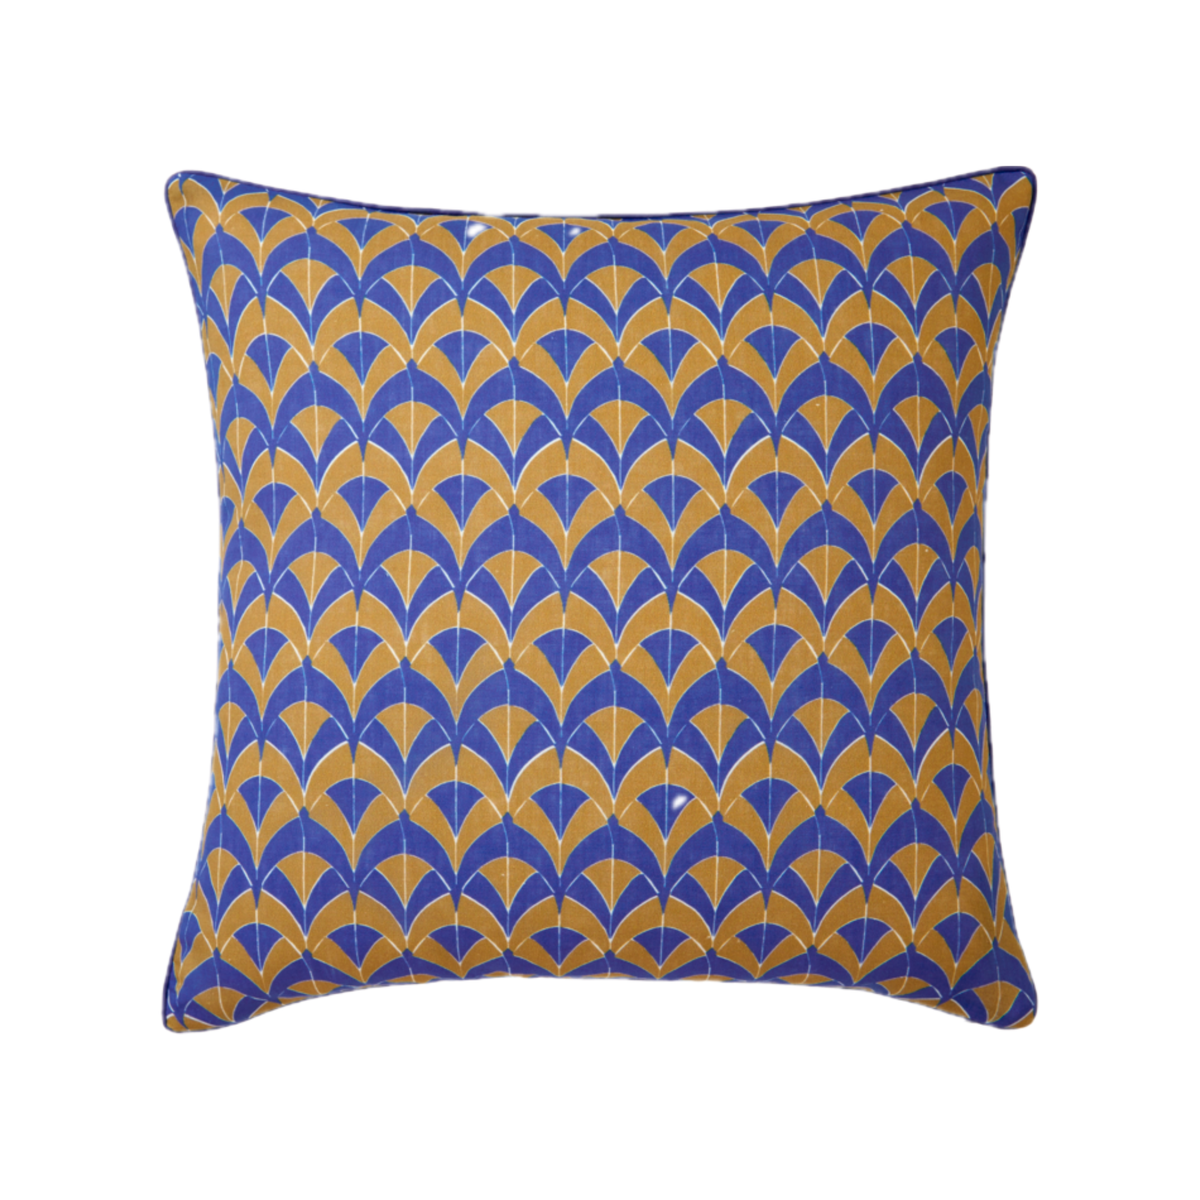 Decorative Pillow of Yves Delorme Canopée Bedding